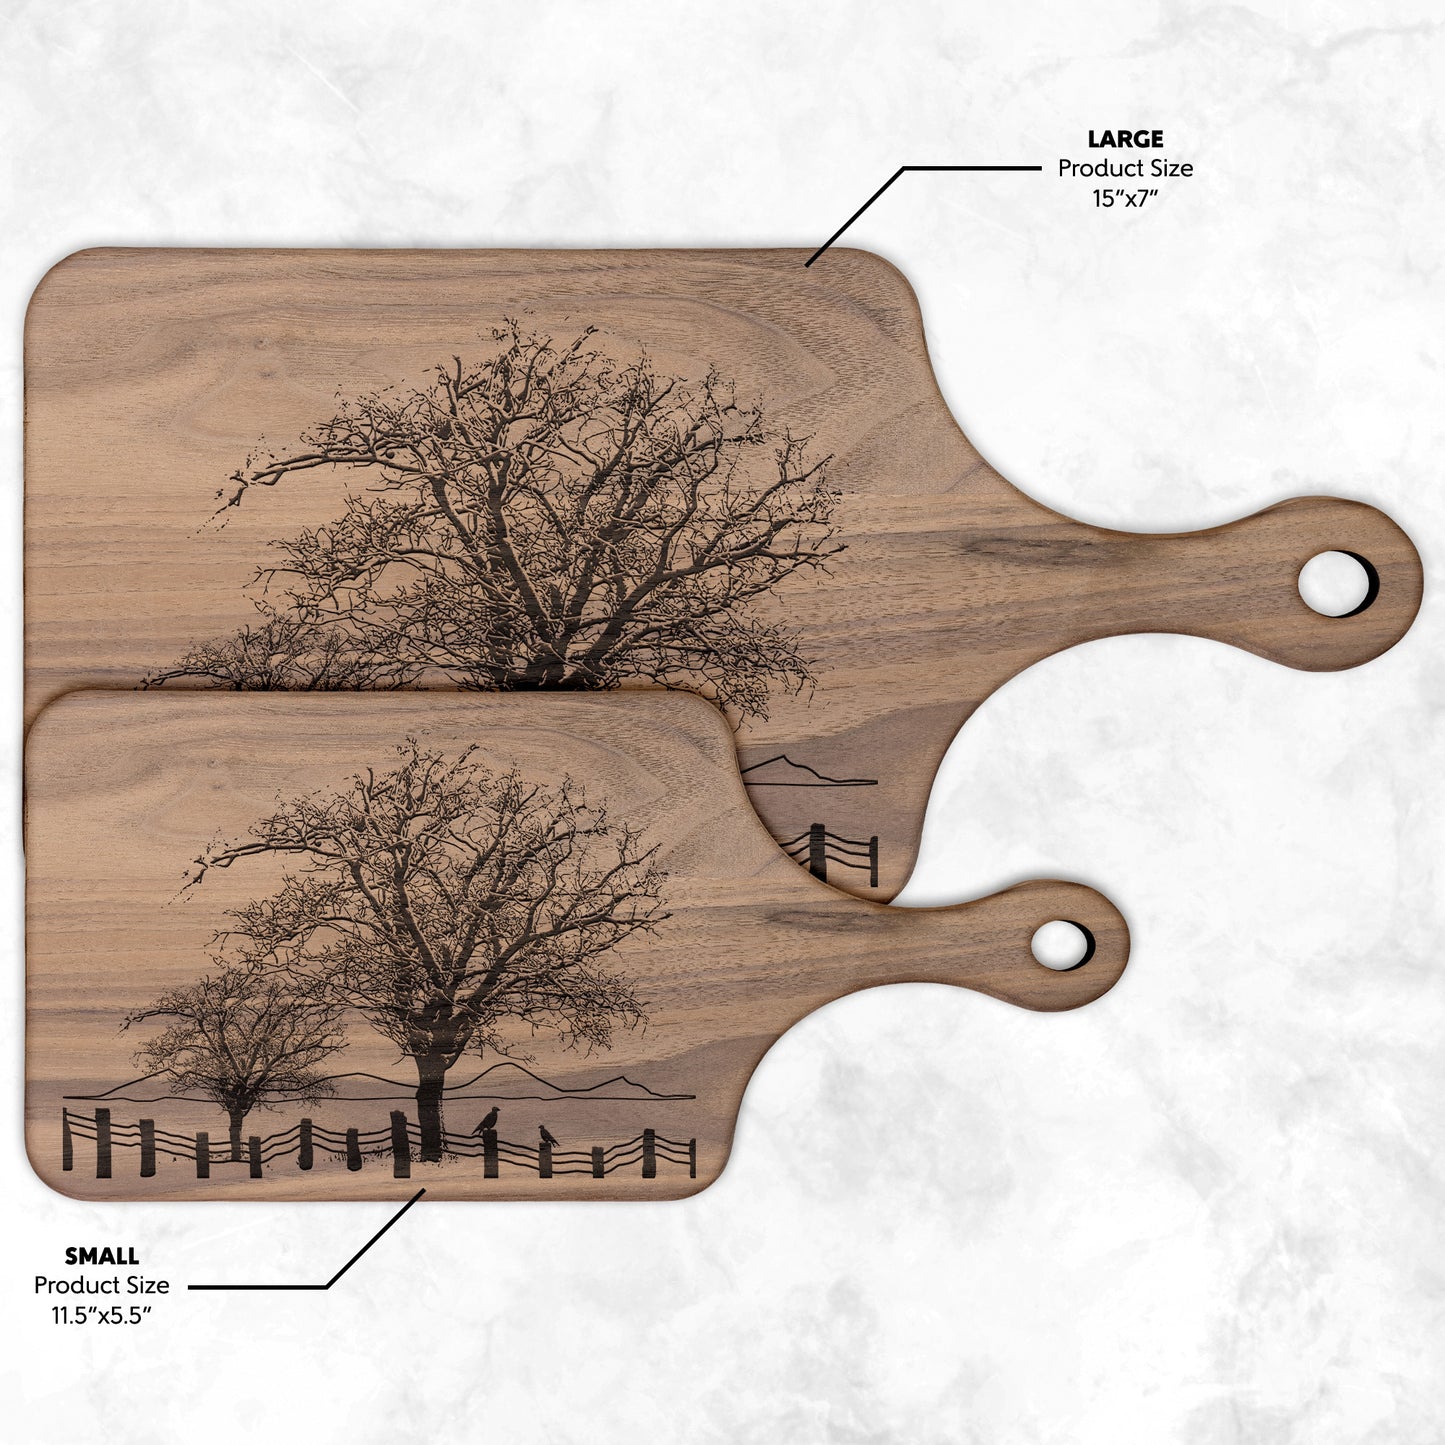 Maple Cutting Board, Walnut Cutting Board, Paddle Cutting Board with Trees & Fence, Perfect Housewarming Gift, Farm Boards Crafted in USA